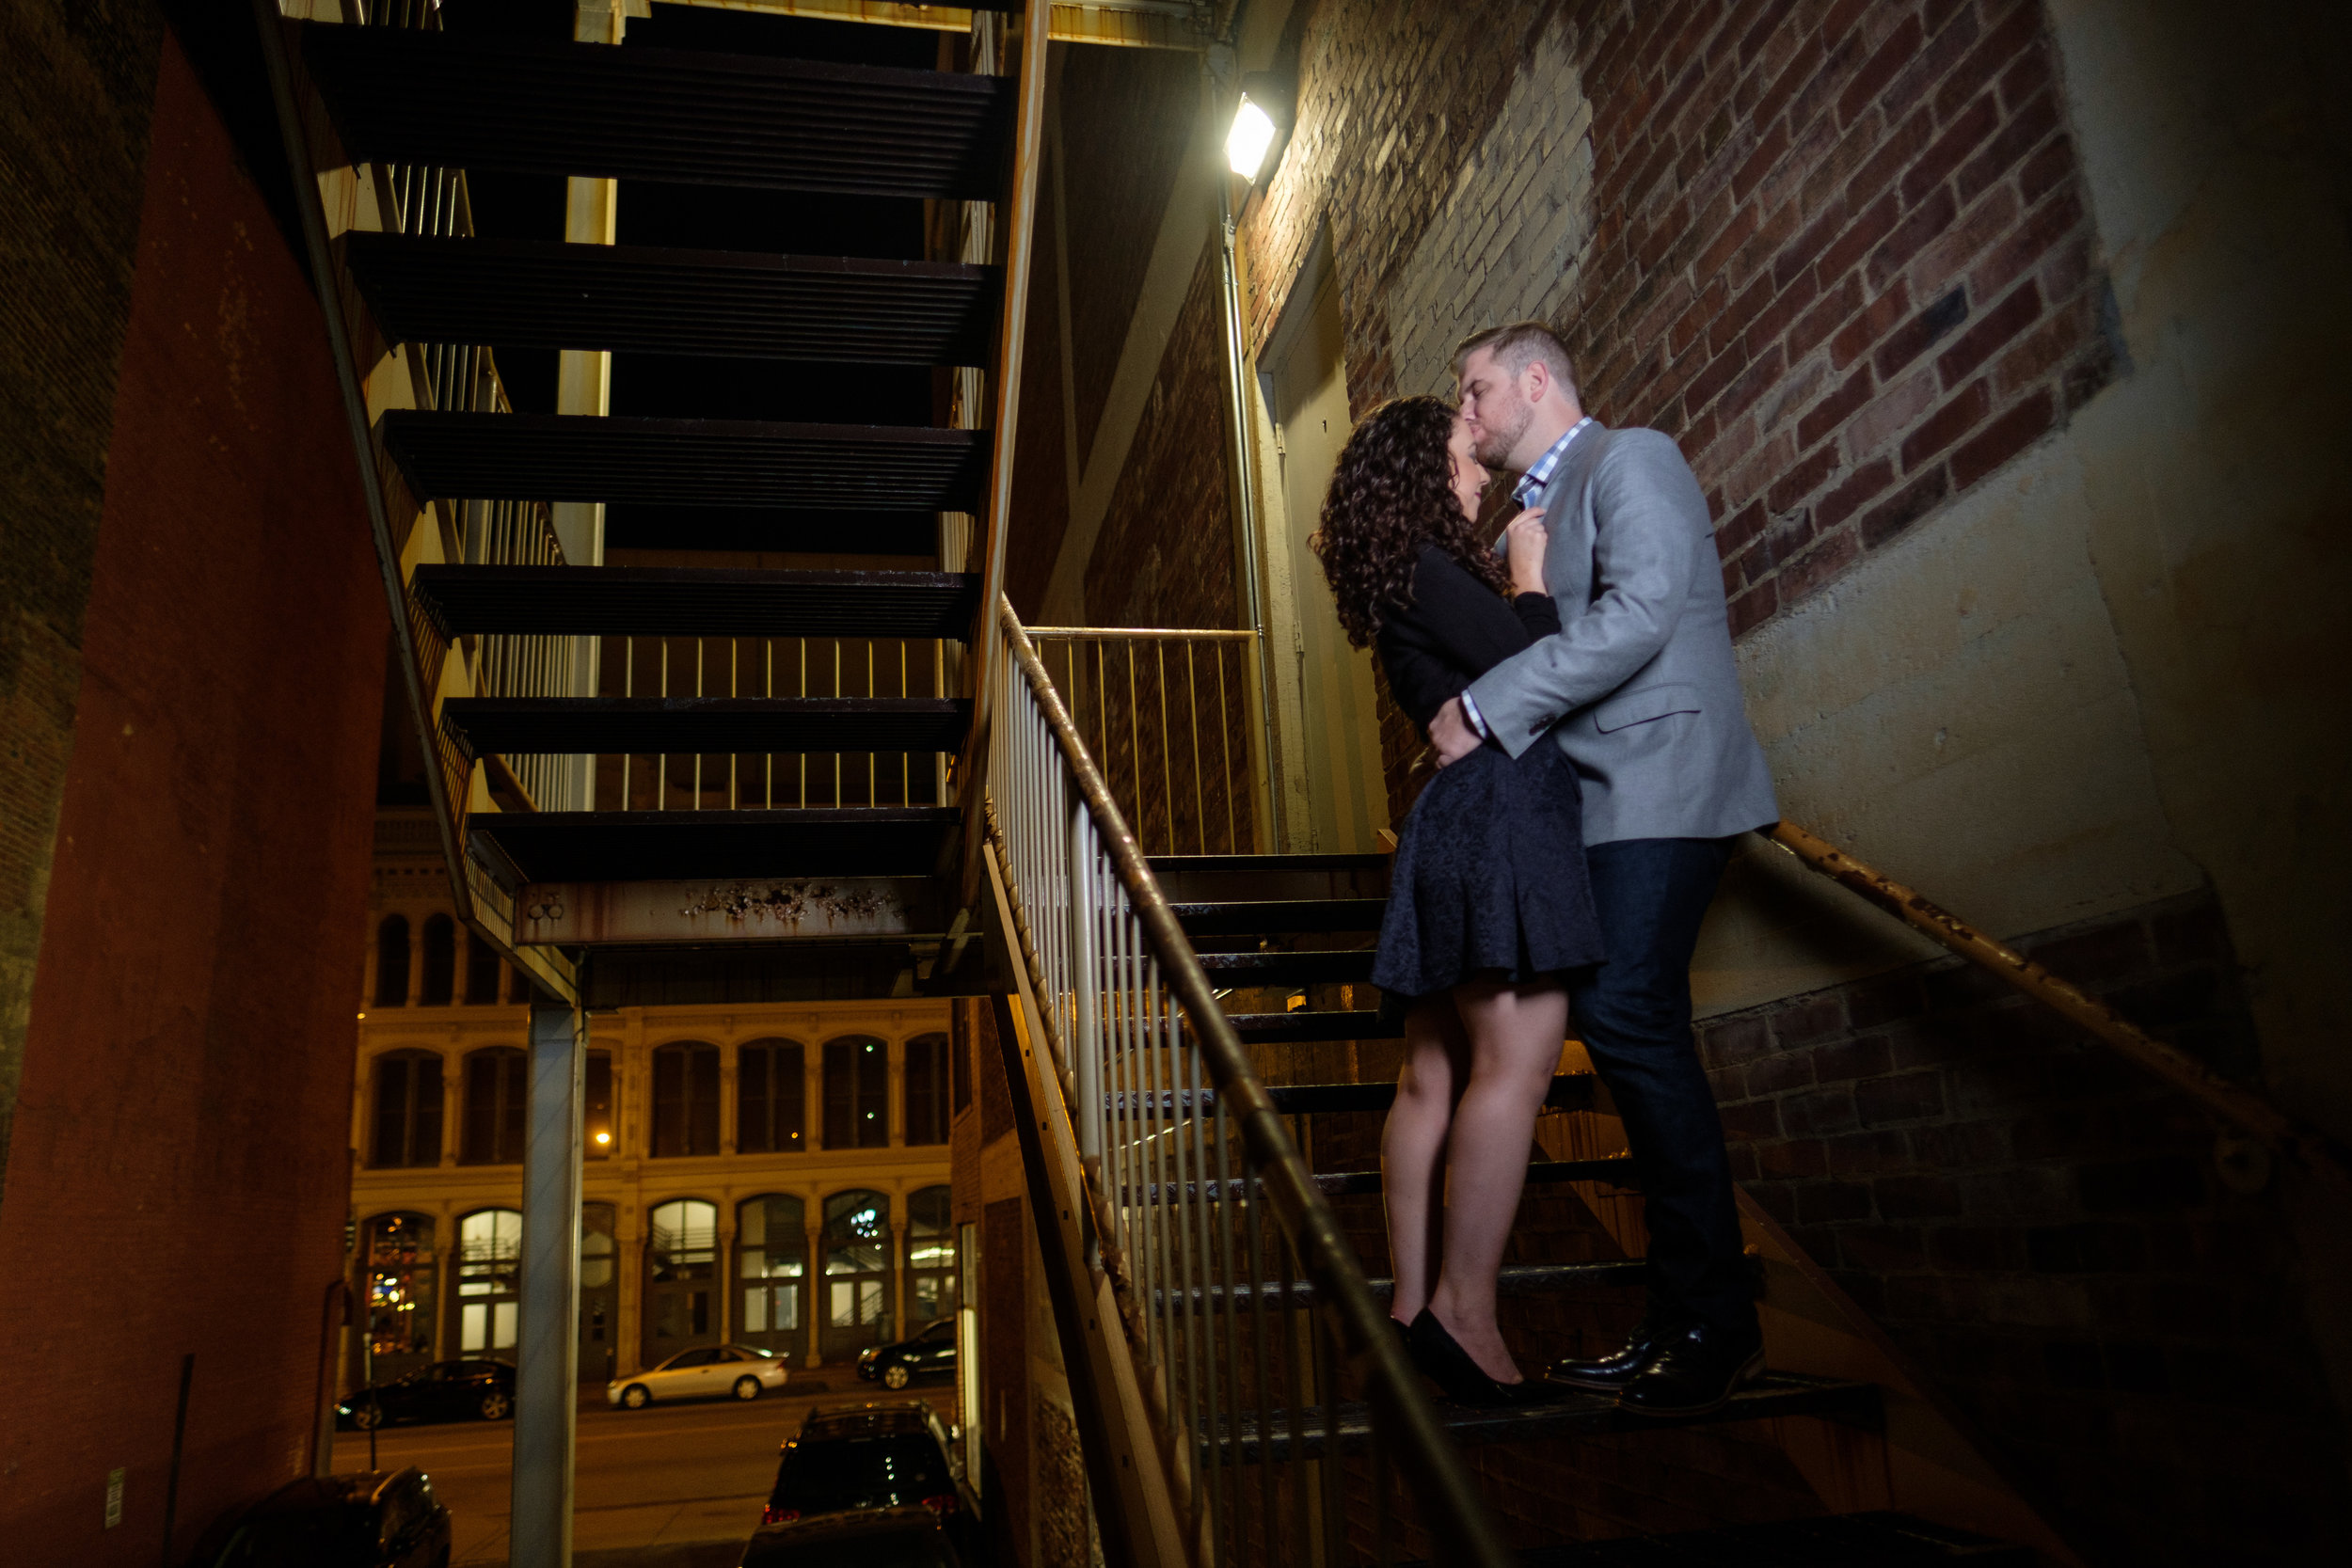 Downtown-Indianapolis-night-engagement-pictures-17.jpg